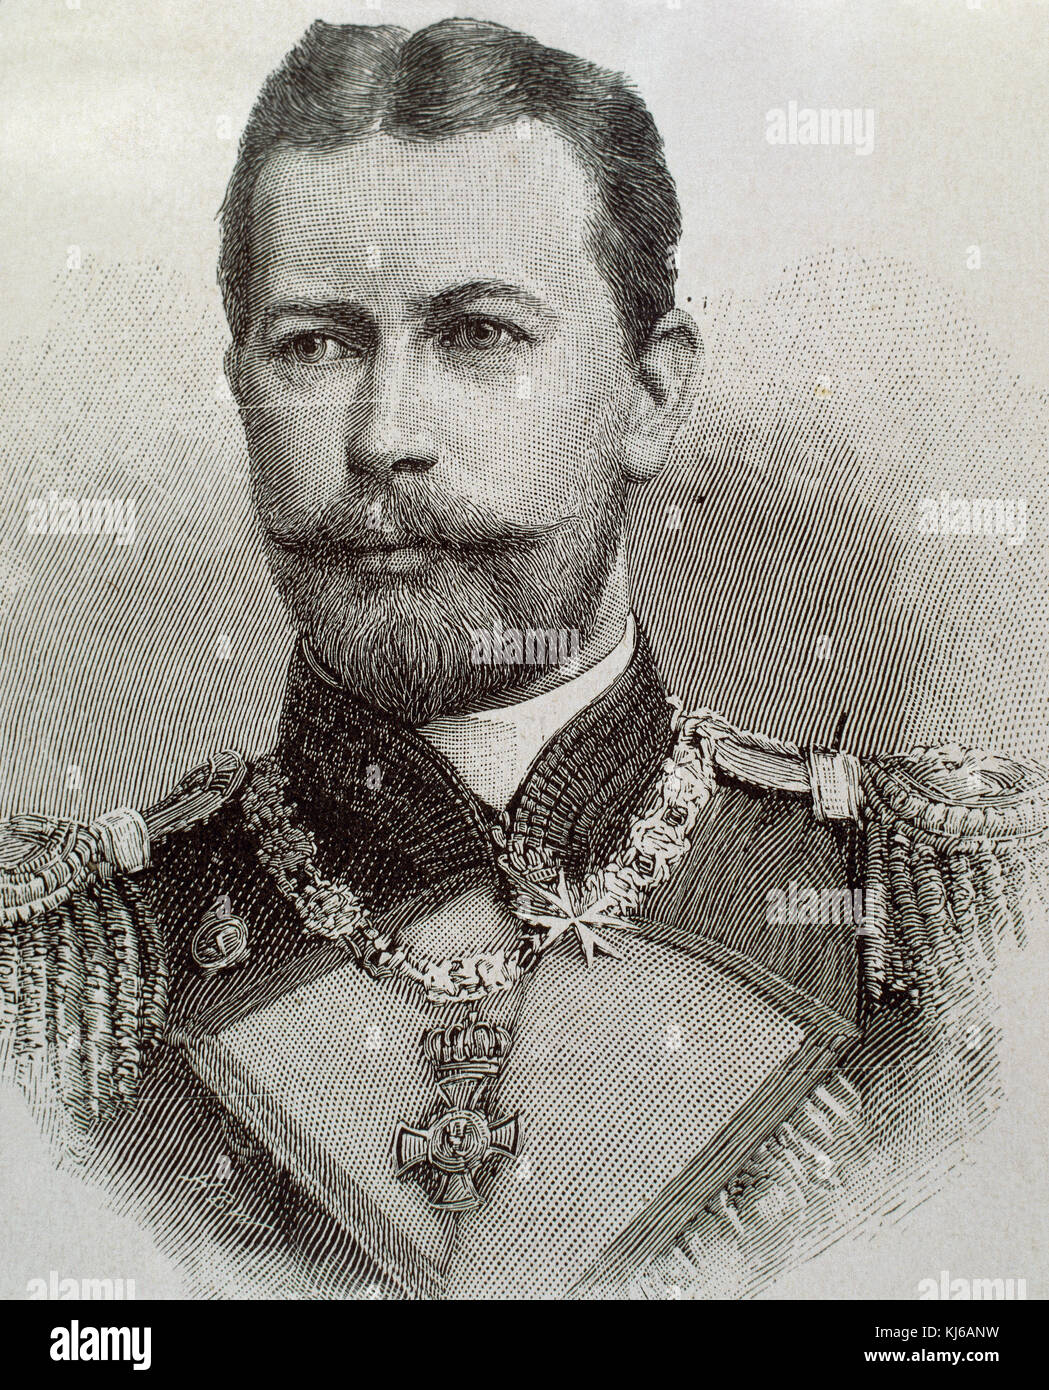 Prince Henry of Prussia (1862-1929). Younger brother of German Emperor William II and a Prince of Prussia. He was also a grandson of Queen Victoria. Portrait. Engraving, 1891. Stock Photo